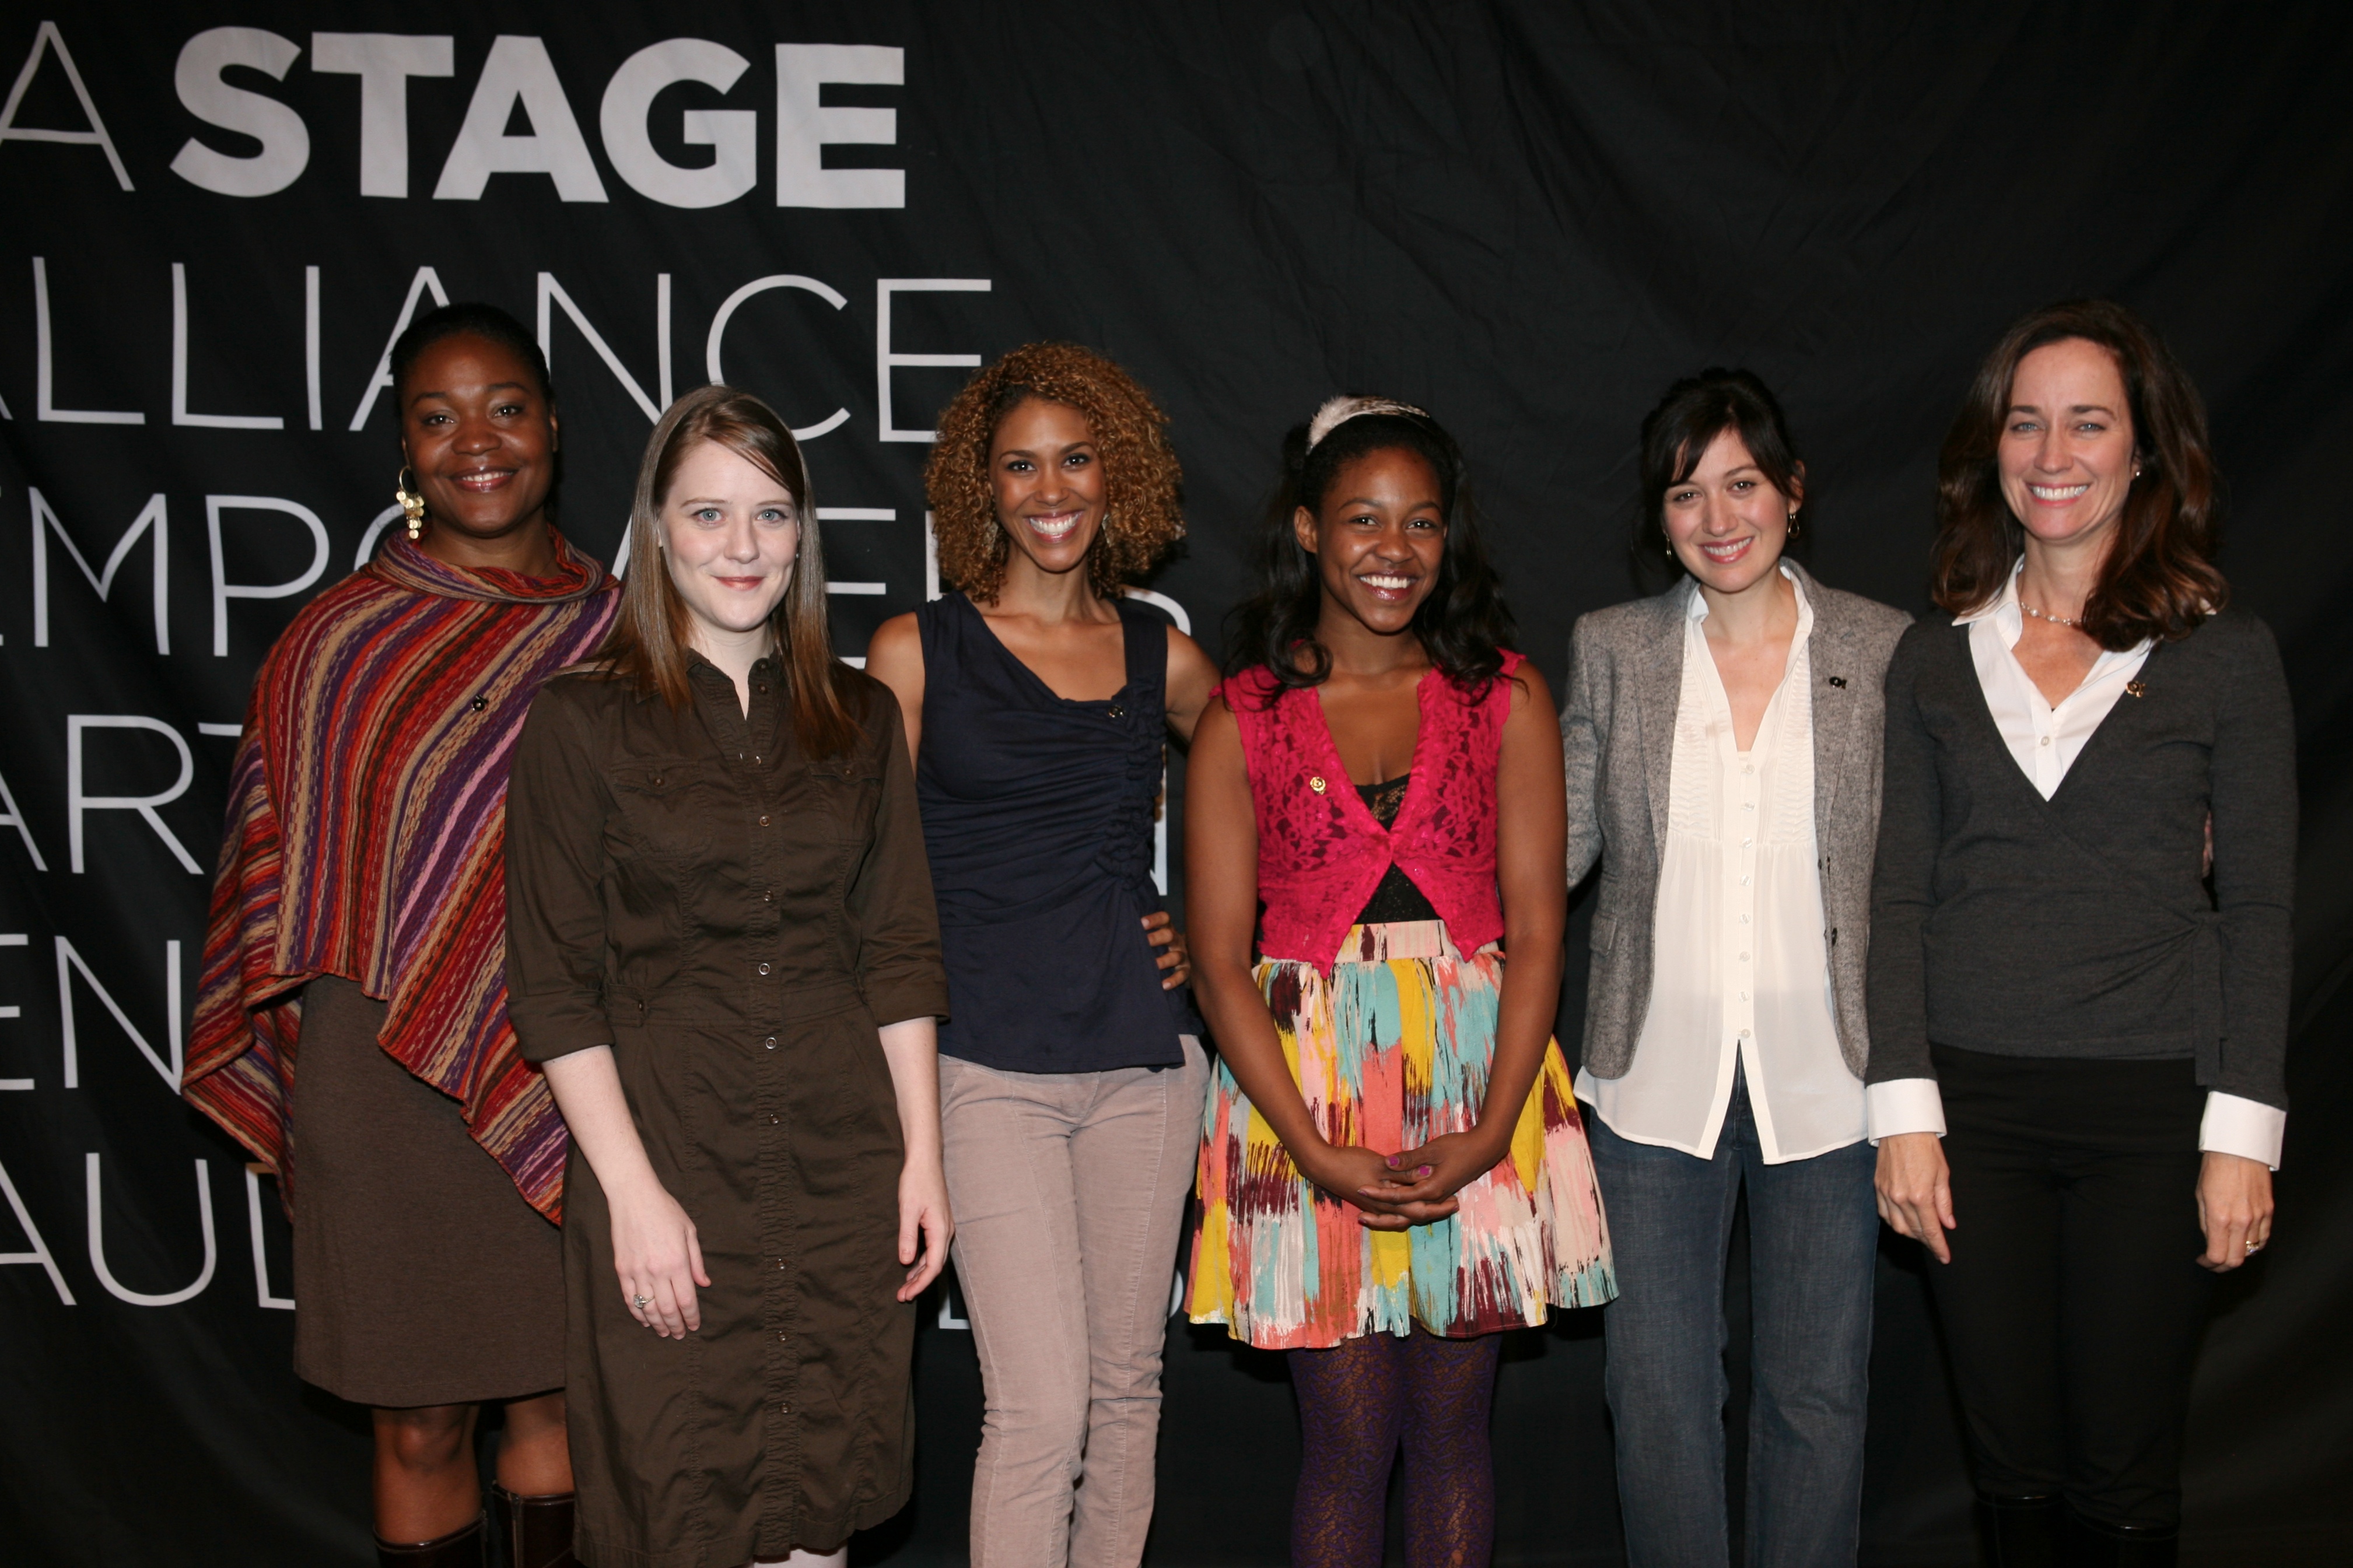 The nominees for Featured Actress in a Play at the 2011 LA Stage Alliance Ovation Awards Nominee Reception held at the Norris Center for Performing Arts on October 16, 2011 in Rolling Hills Estates, California.